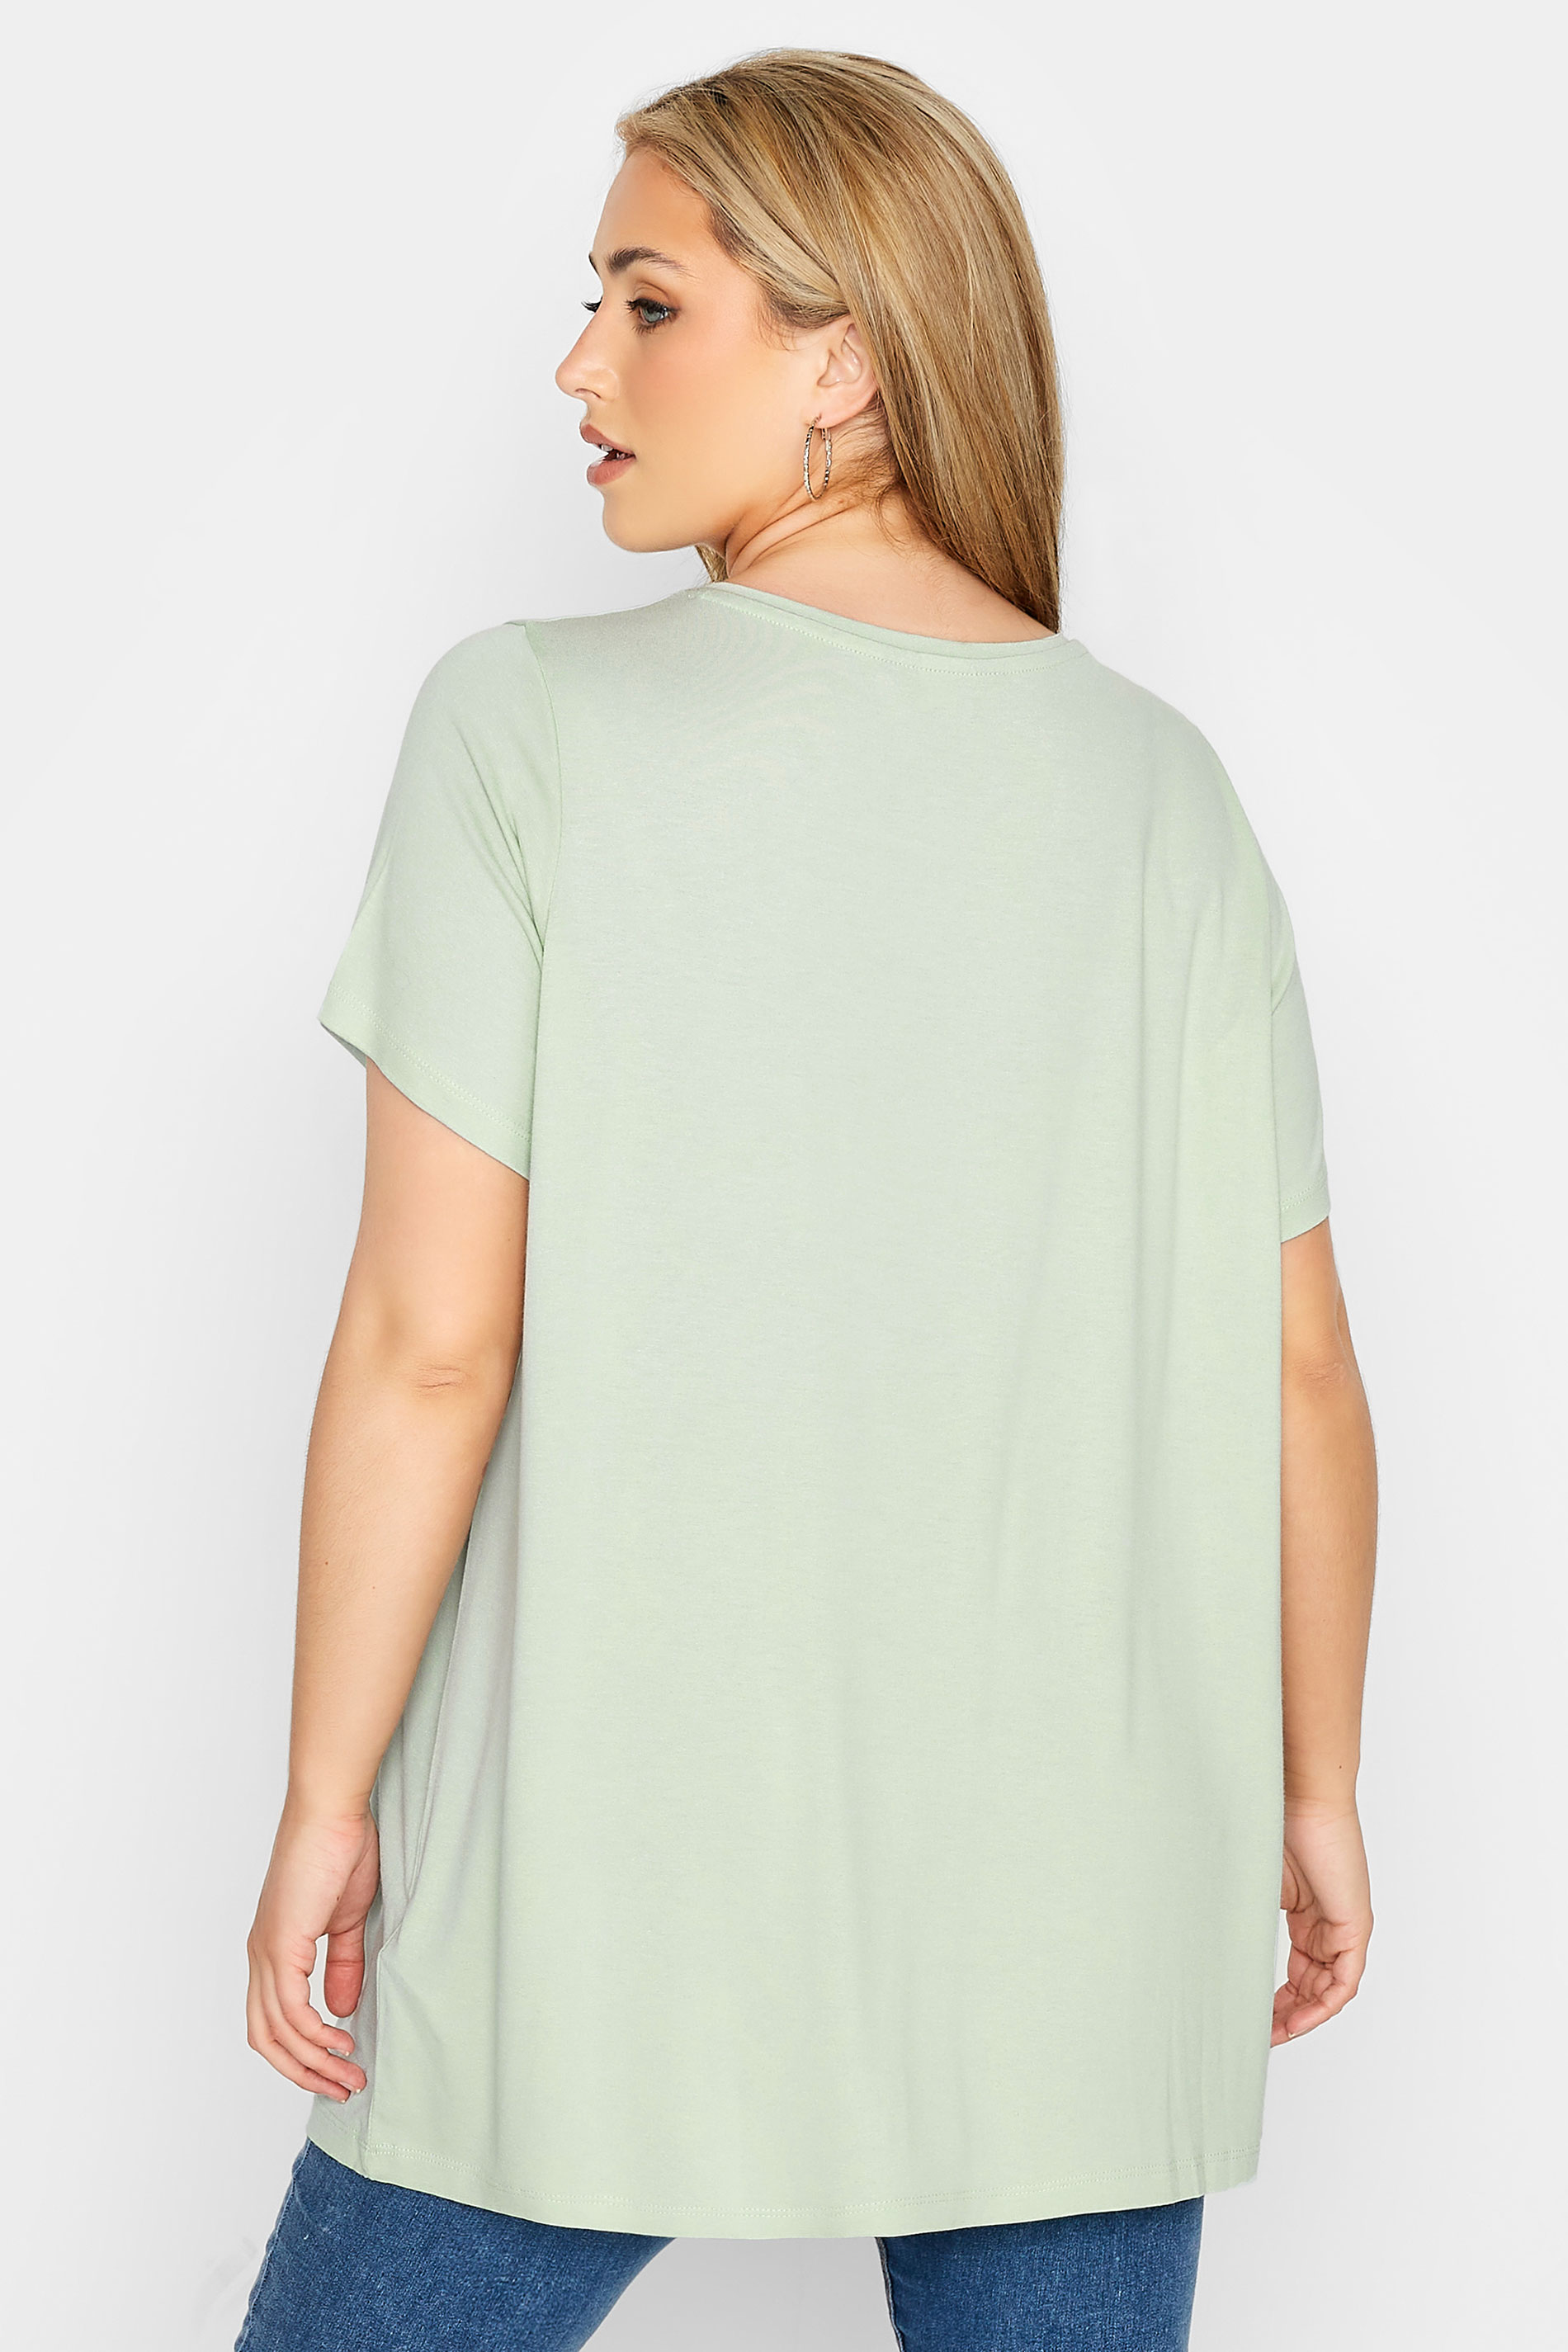 Grande taille  Tops Grande taille  Tops à Slogans | T-Shirt Vert Menthe Papillon 'Only For You' - FX07557